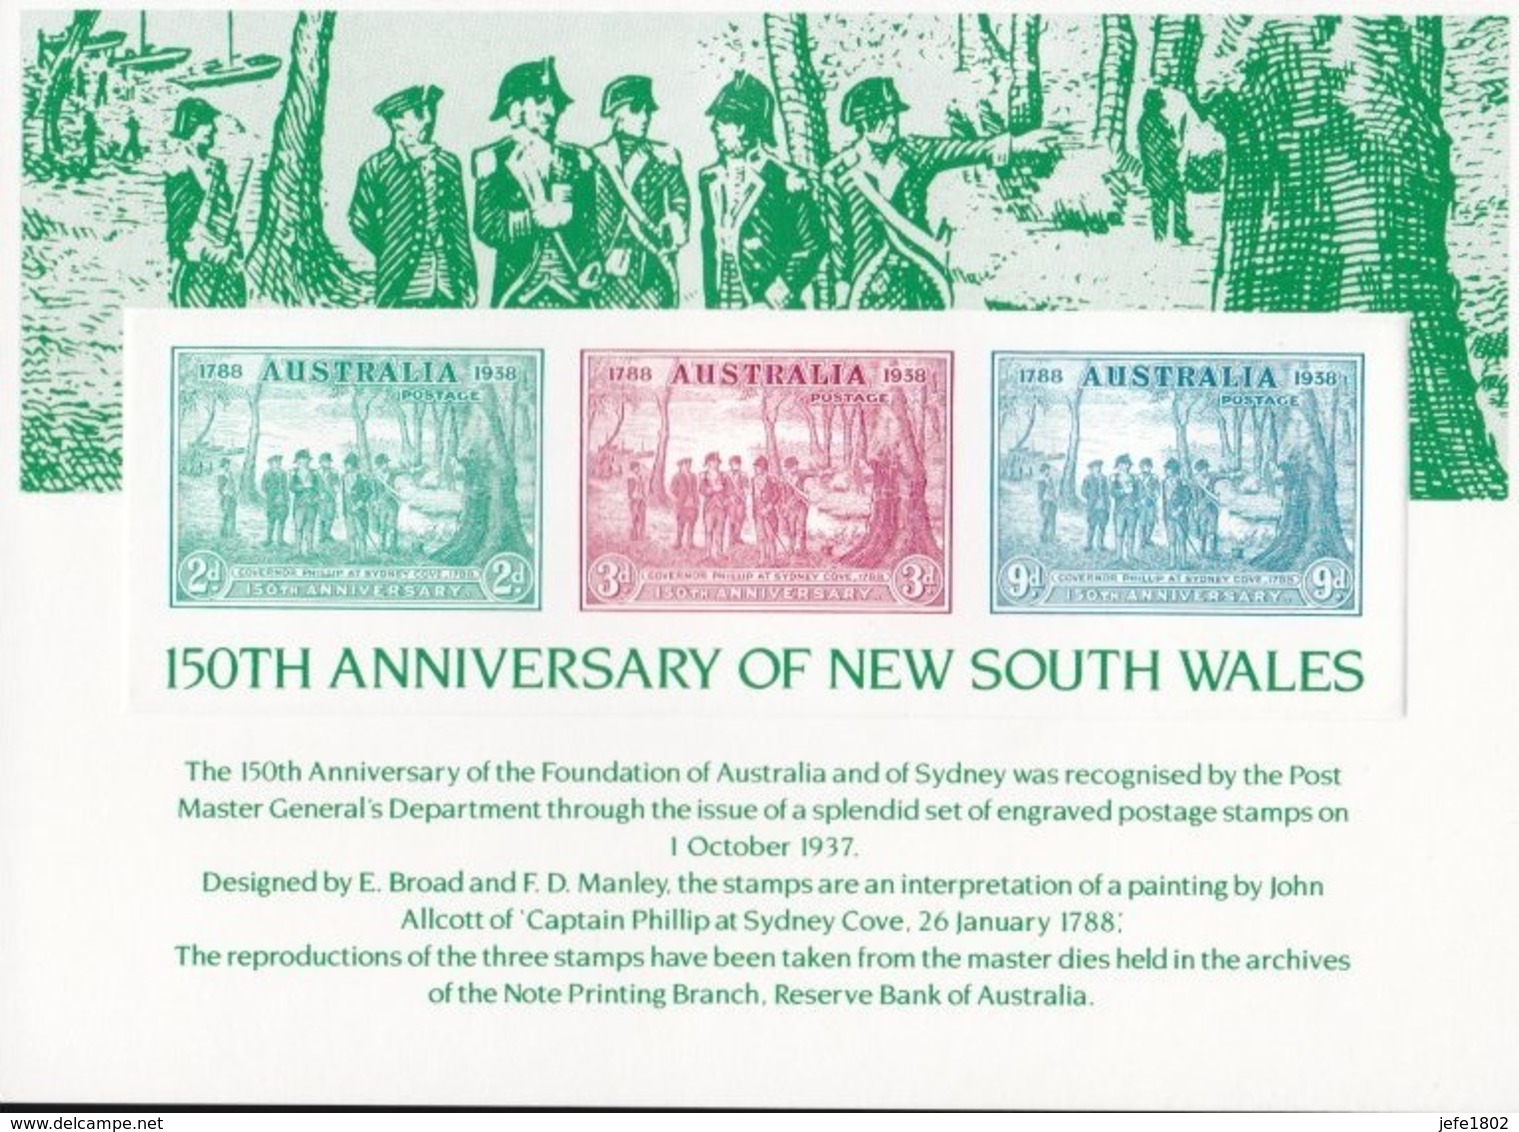 Facsimile Produced For The Australian Philatelic Federation, 1989 - Card N° 15 - Proofs & Reprints